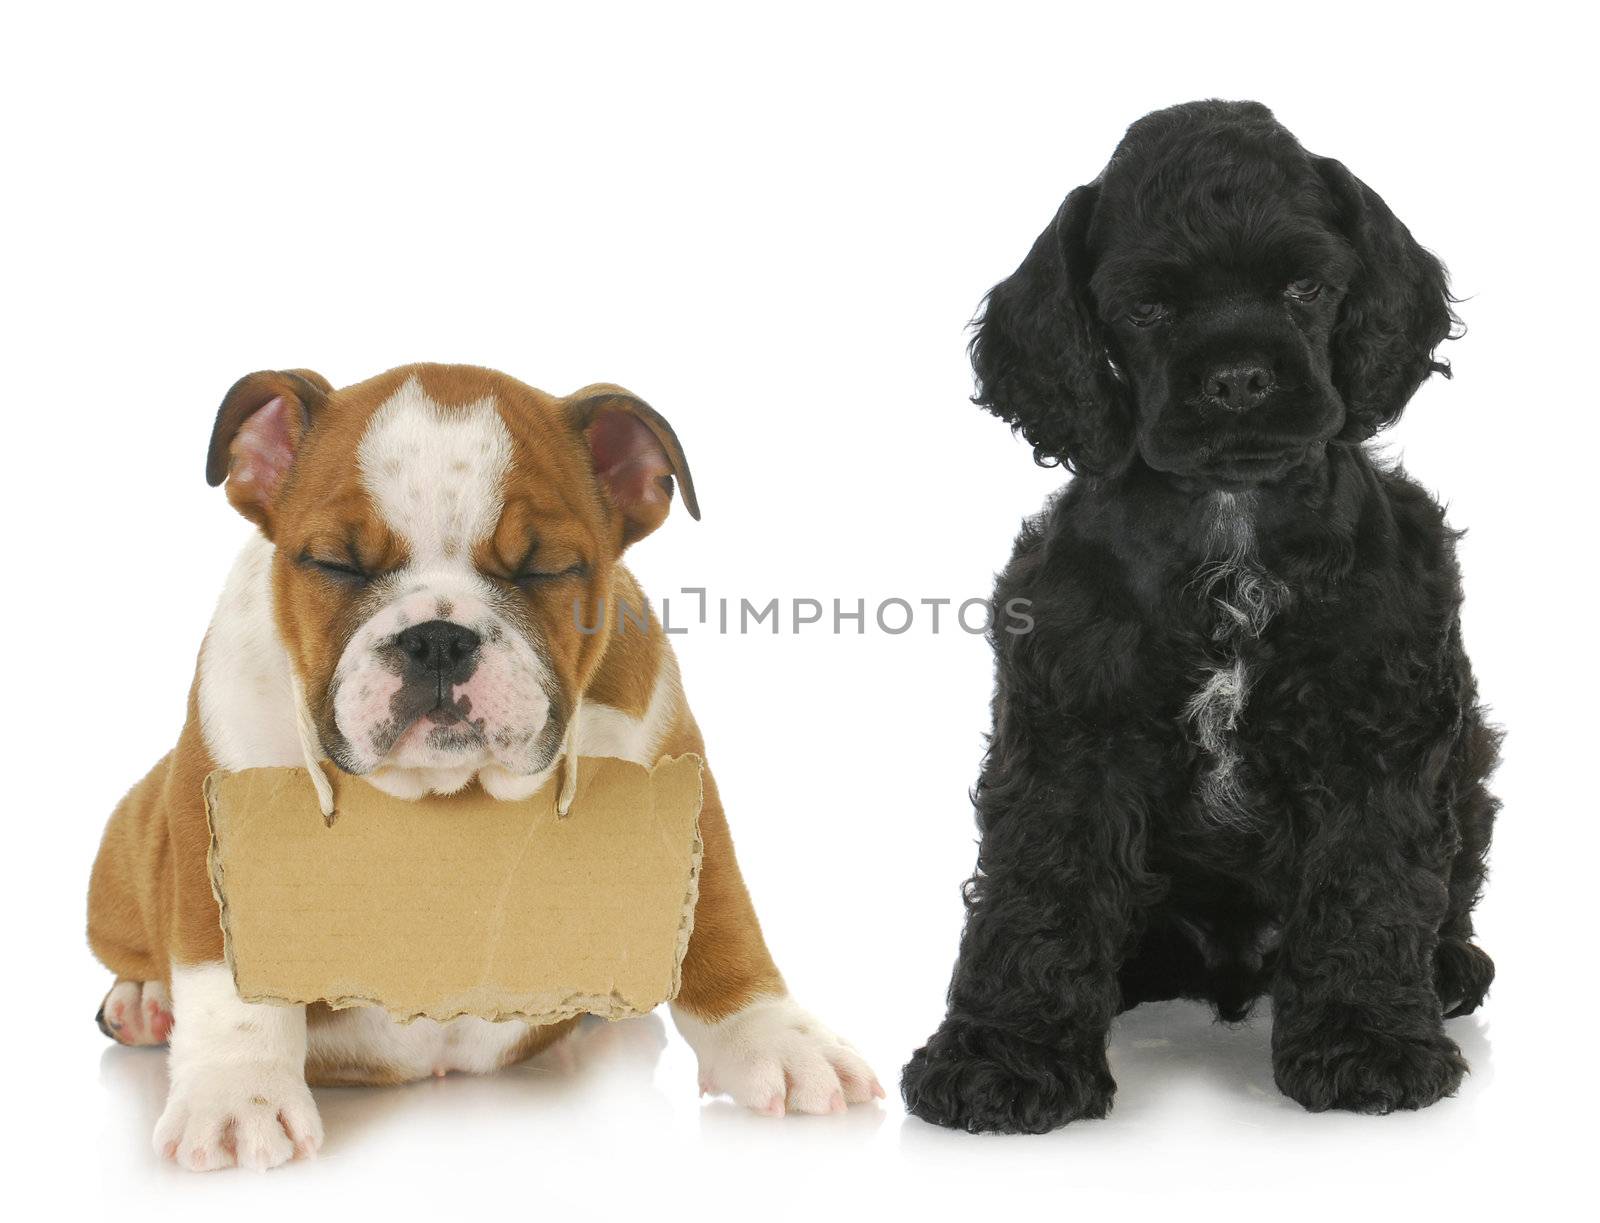 two puppies - cocker spaniel and english bulldog puppy with sign around neck  - 7 weeks old